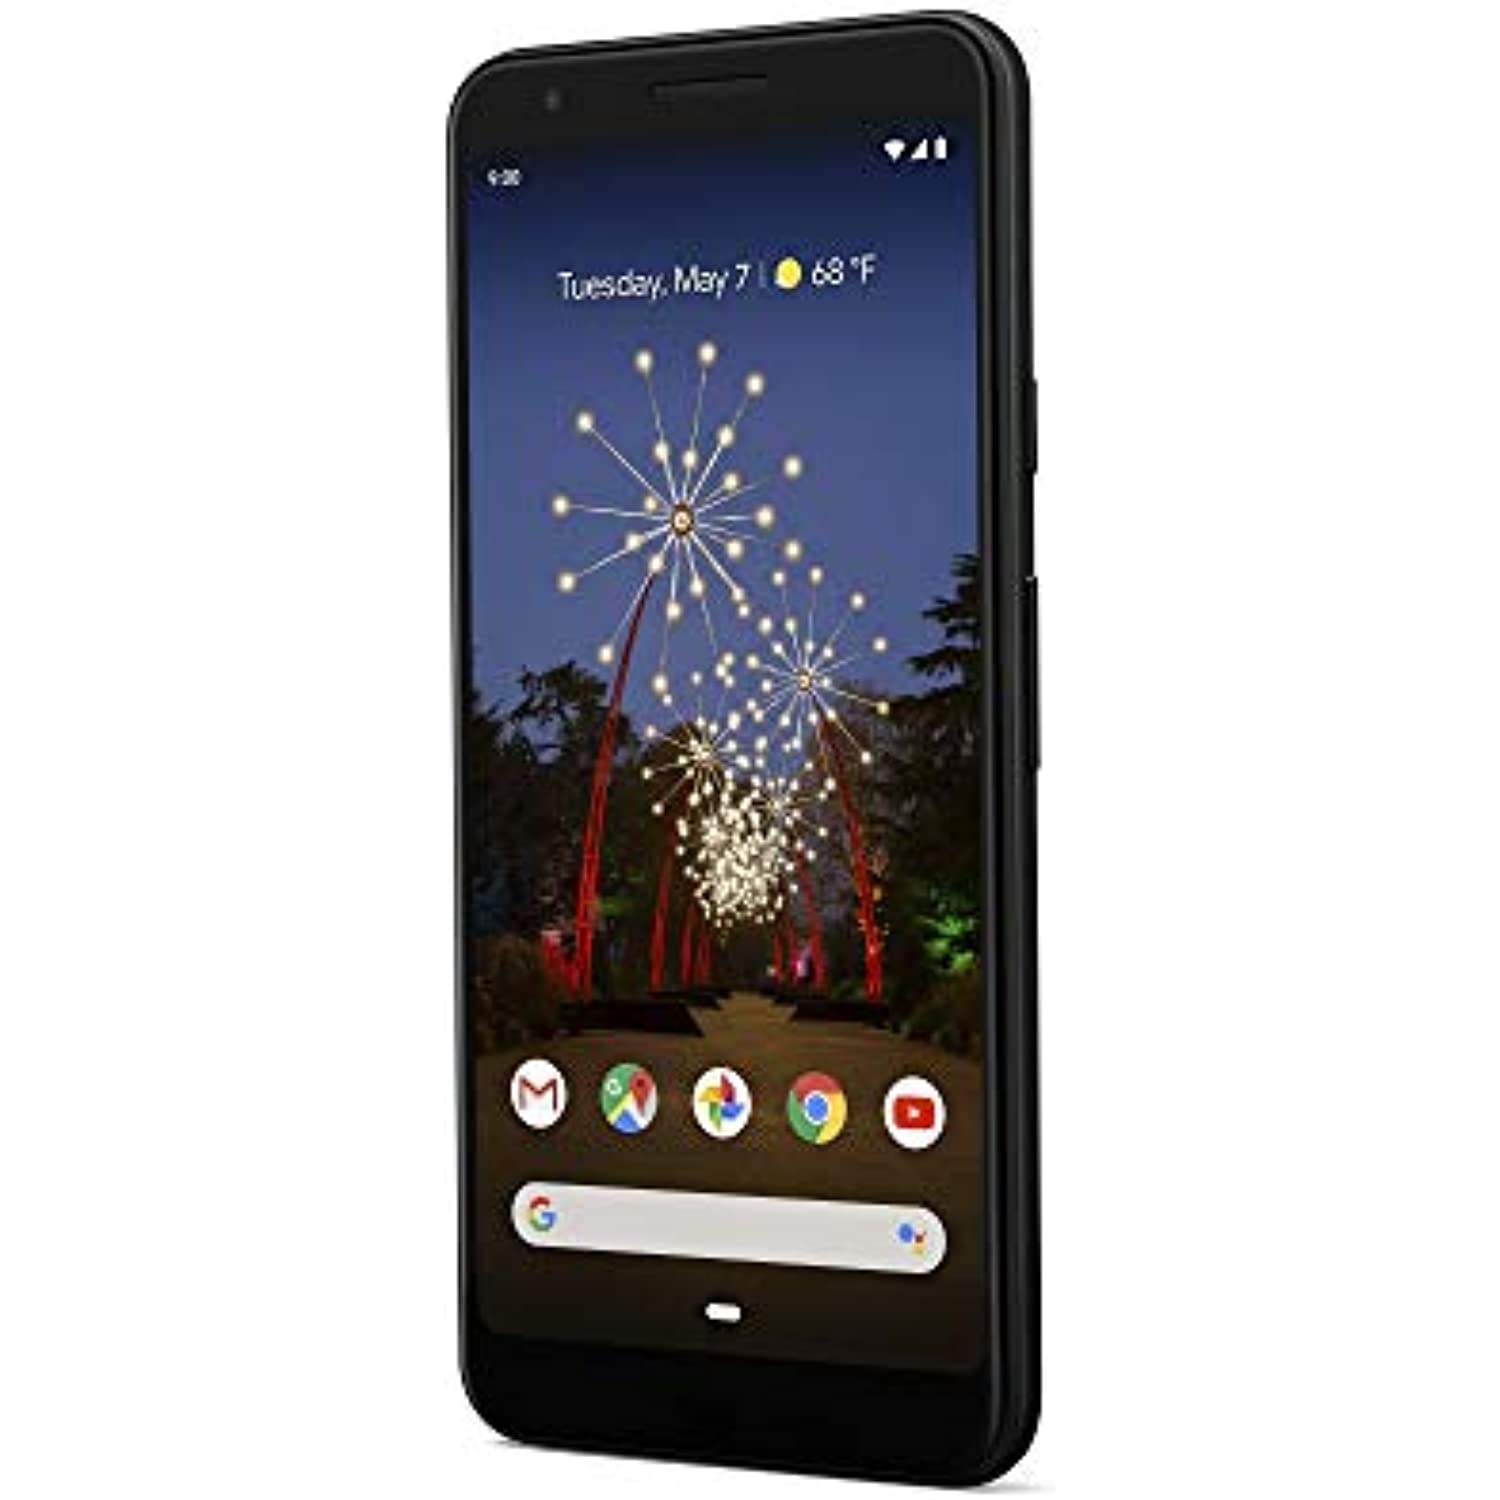 Google - Pixel 3a with 64GB Memory Cell Phone (Unlocked) - Just Black - image 5 of 5